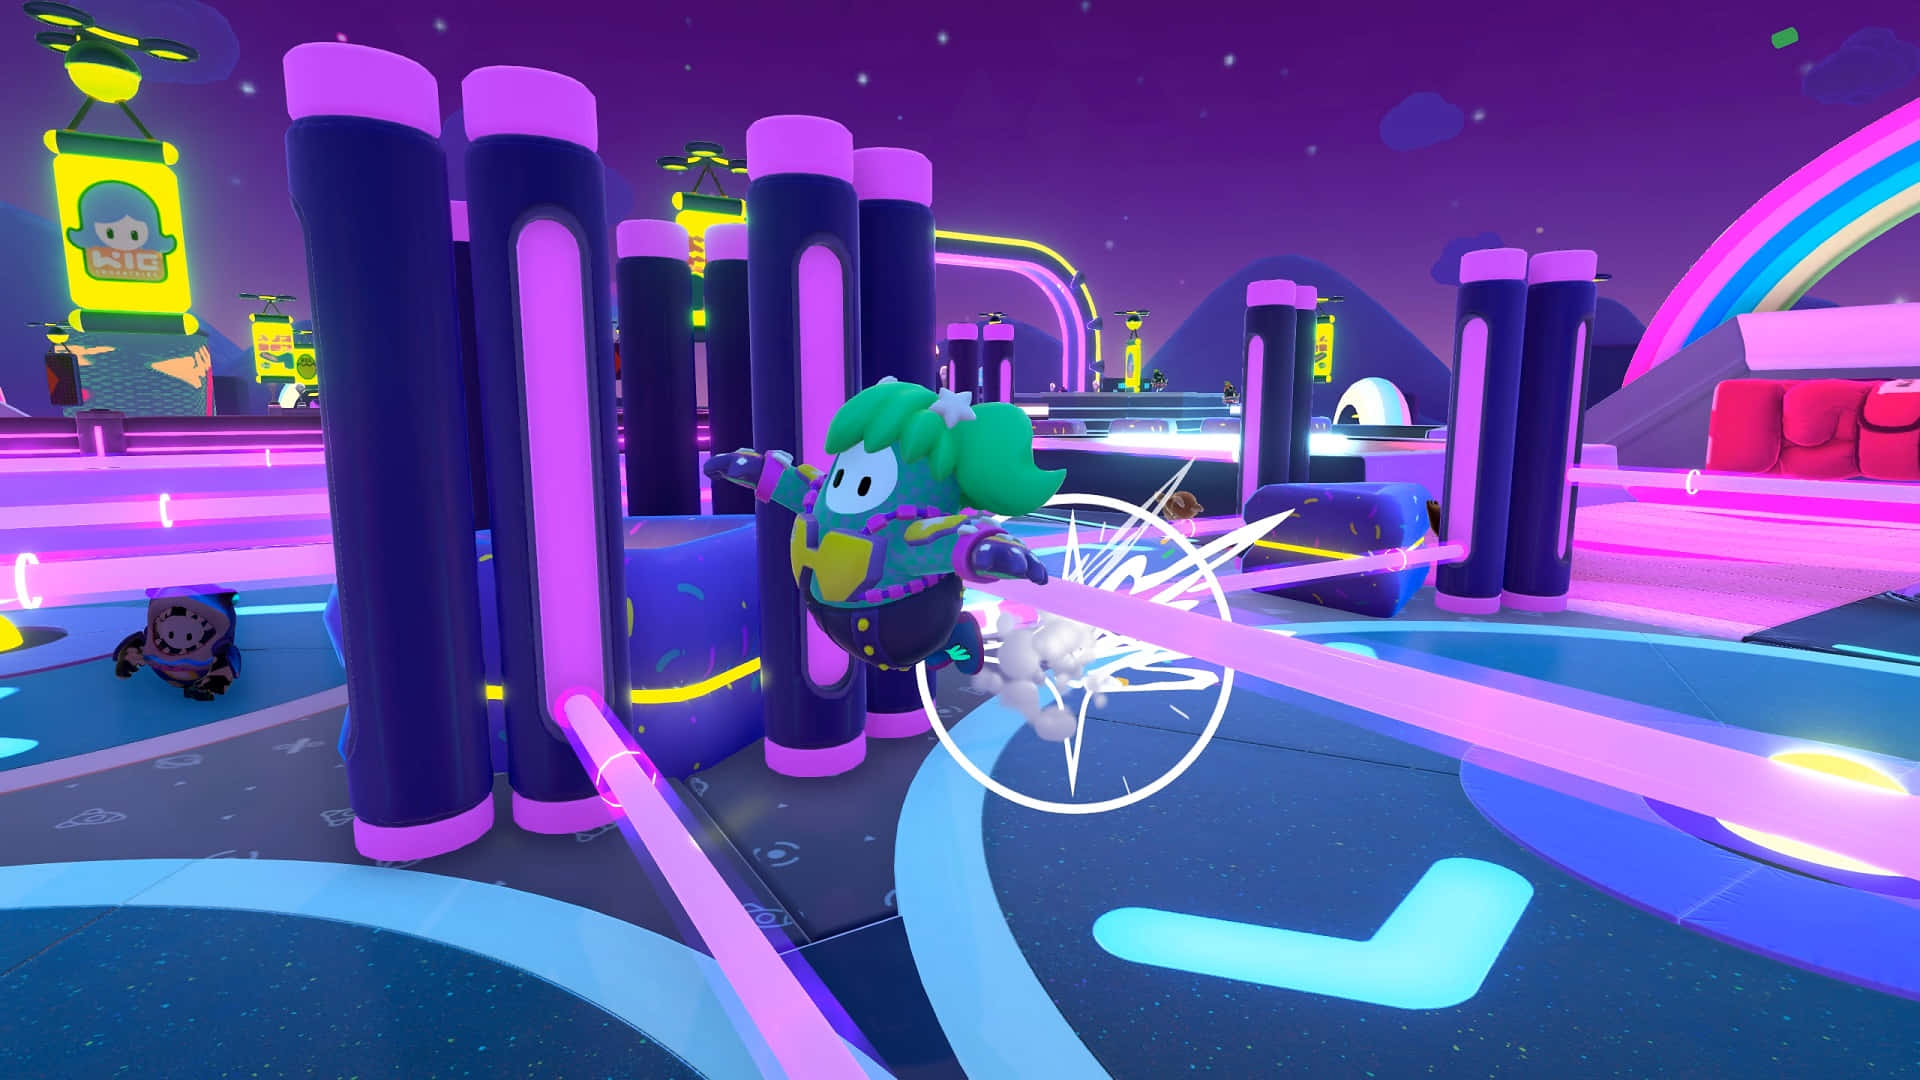 A Game With A Neon Colored Background